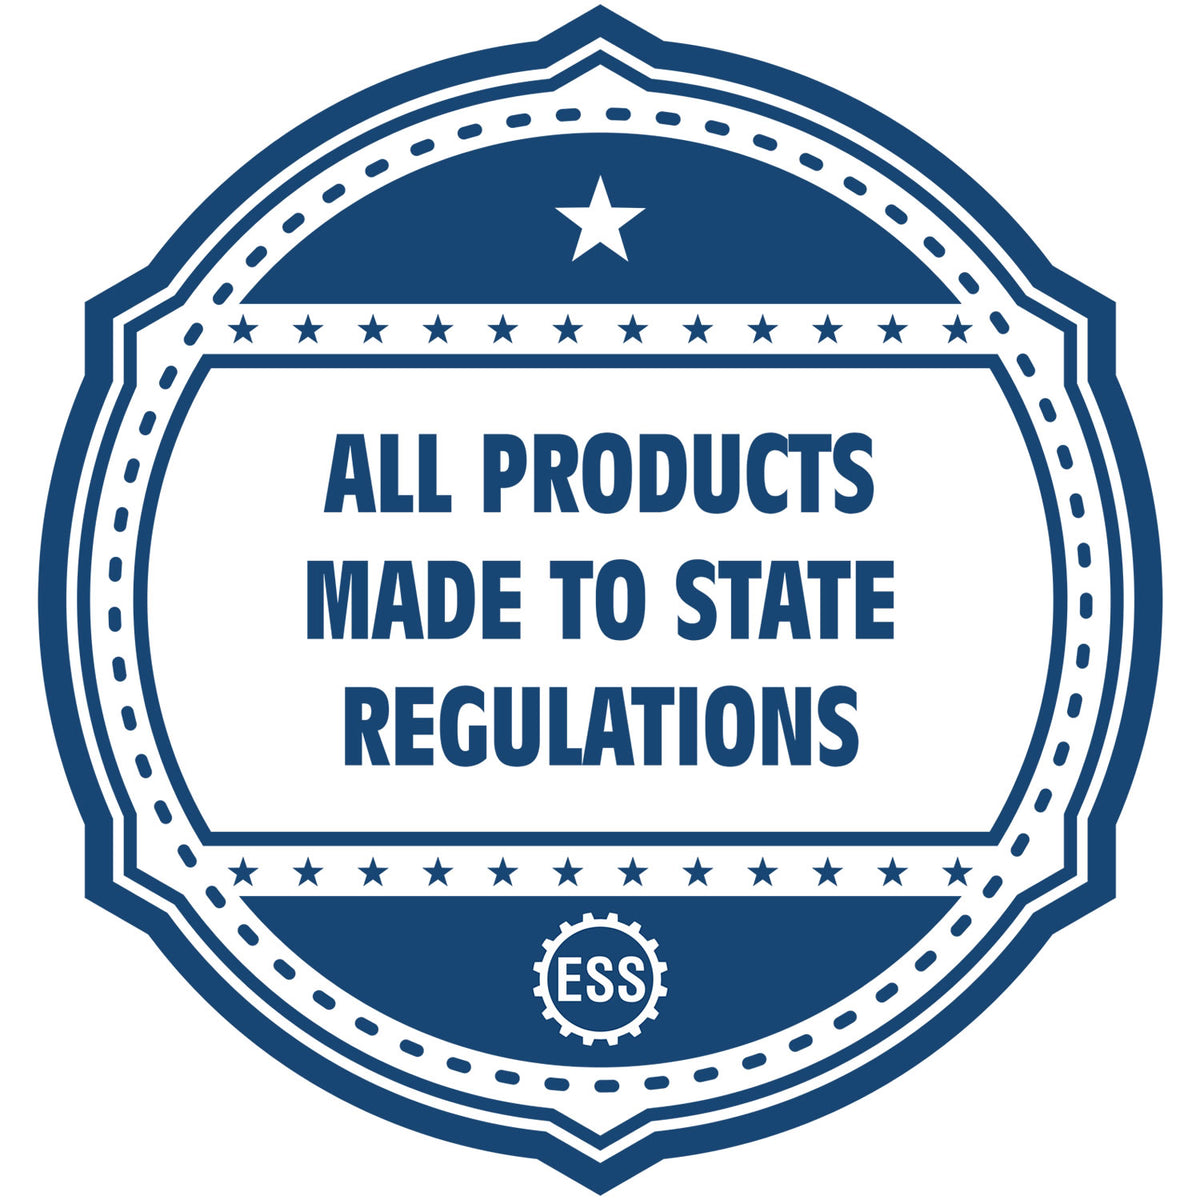 A blue icon or badge for the Hybrid Arkansas Geologist Seal showing that this product is made in compliance with state regulations.